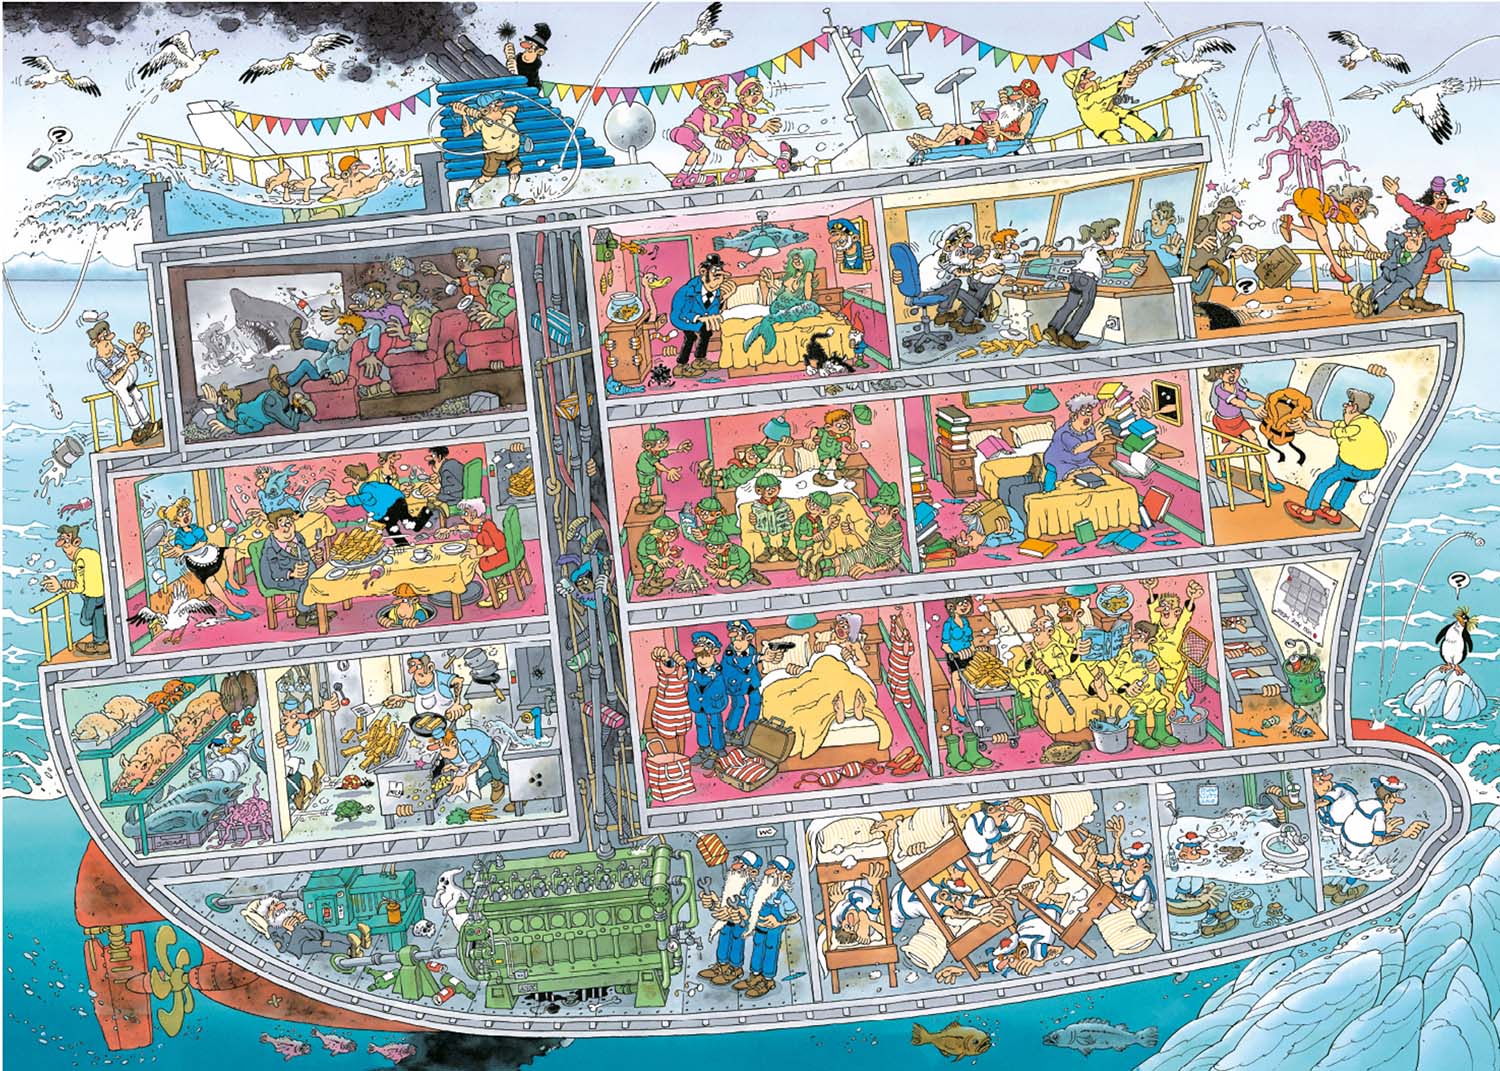 The Cruise Ship Boat Jigsaw Puzzle